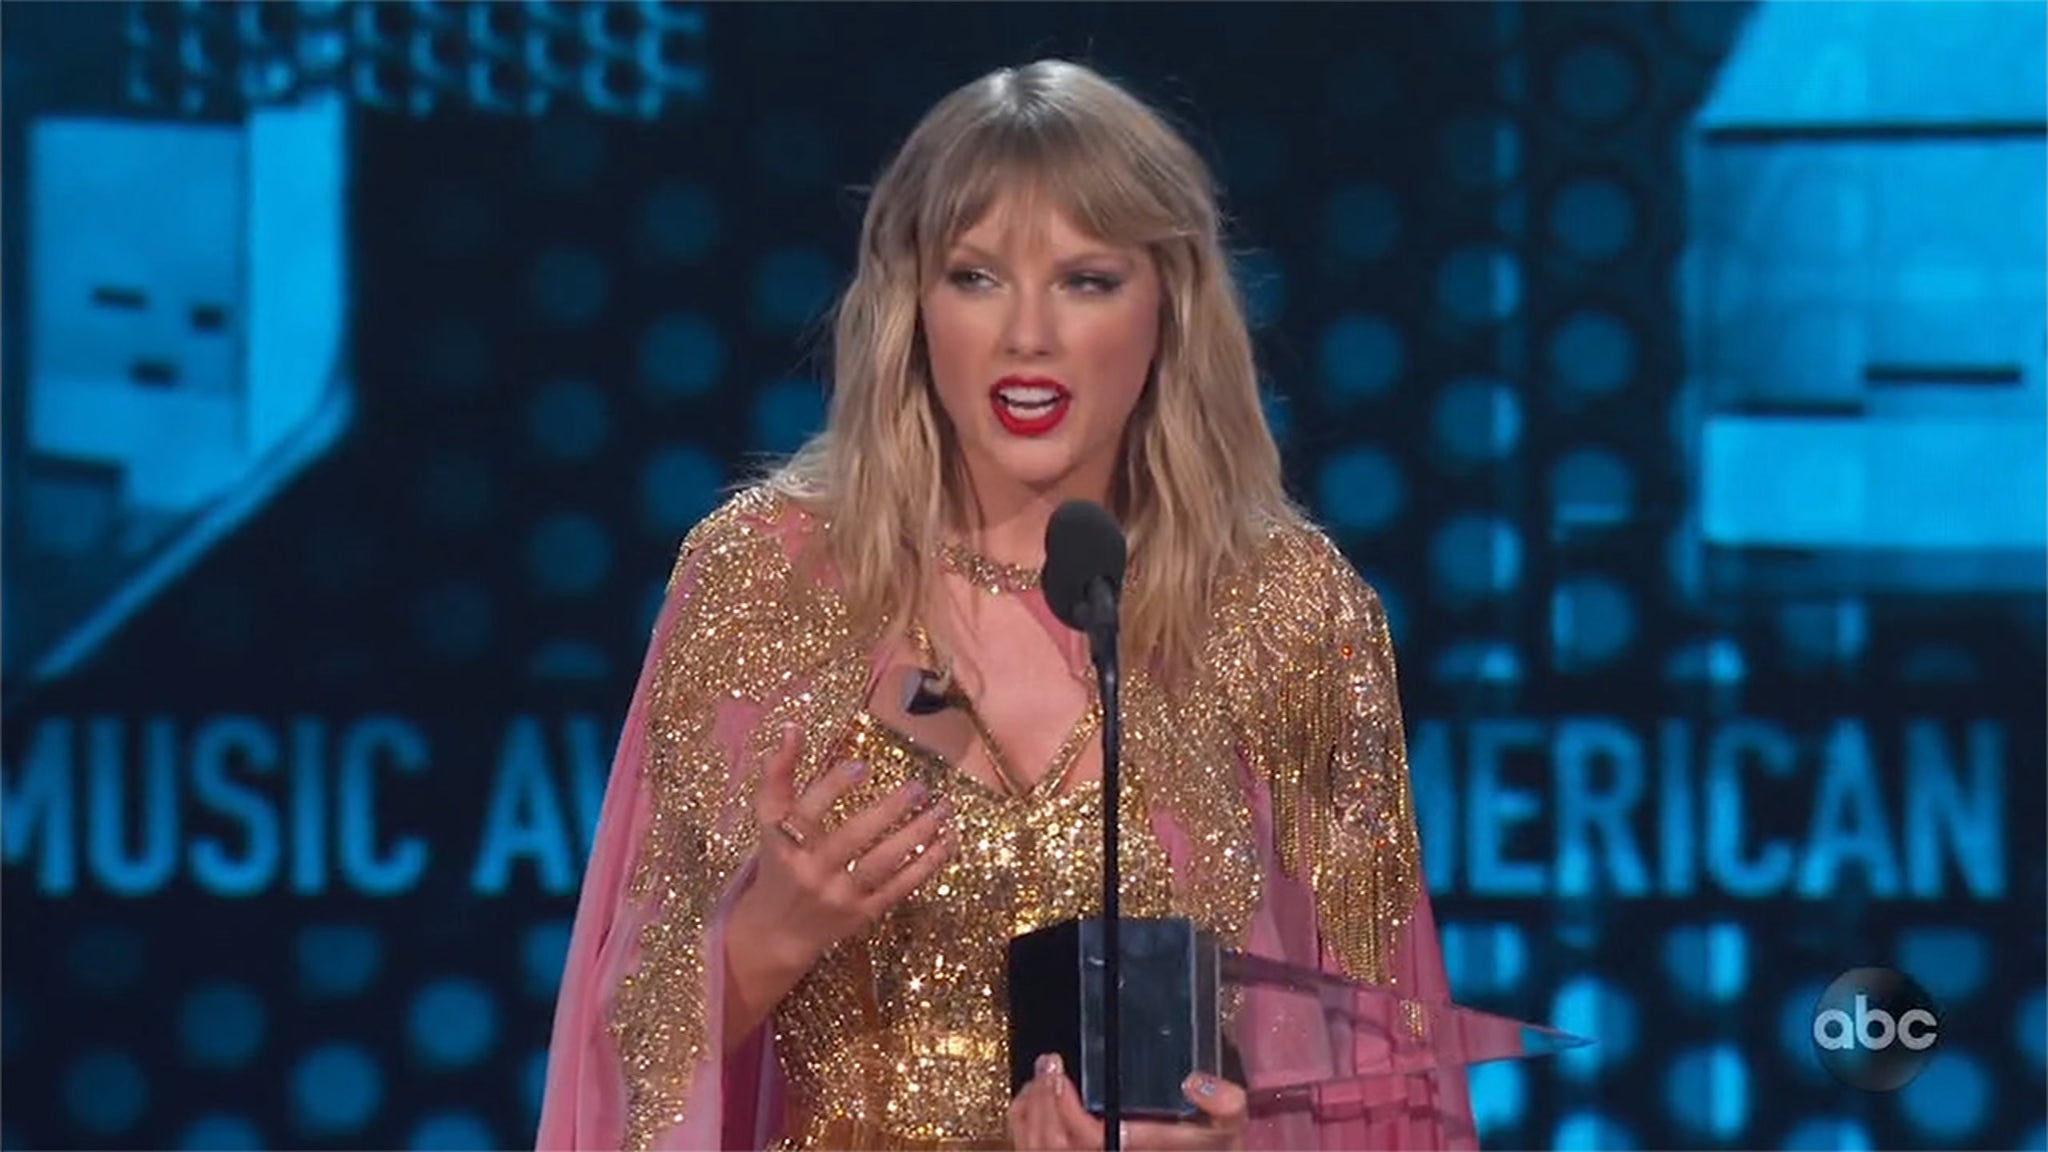 Taylor Swift Accepts AMA Award, No Mention of Scooter Braun or Big Machine